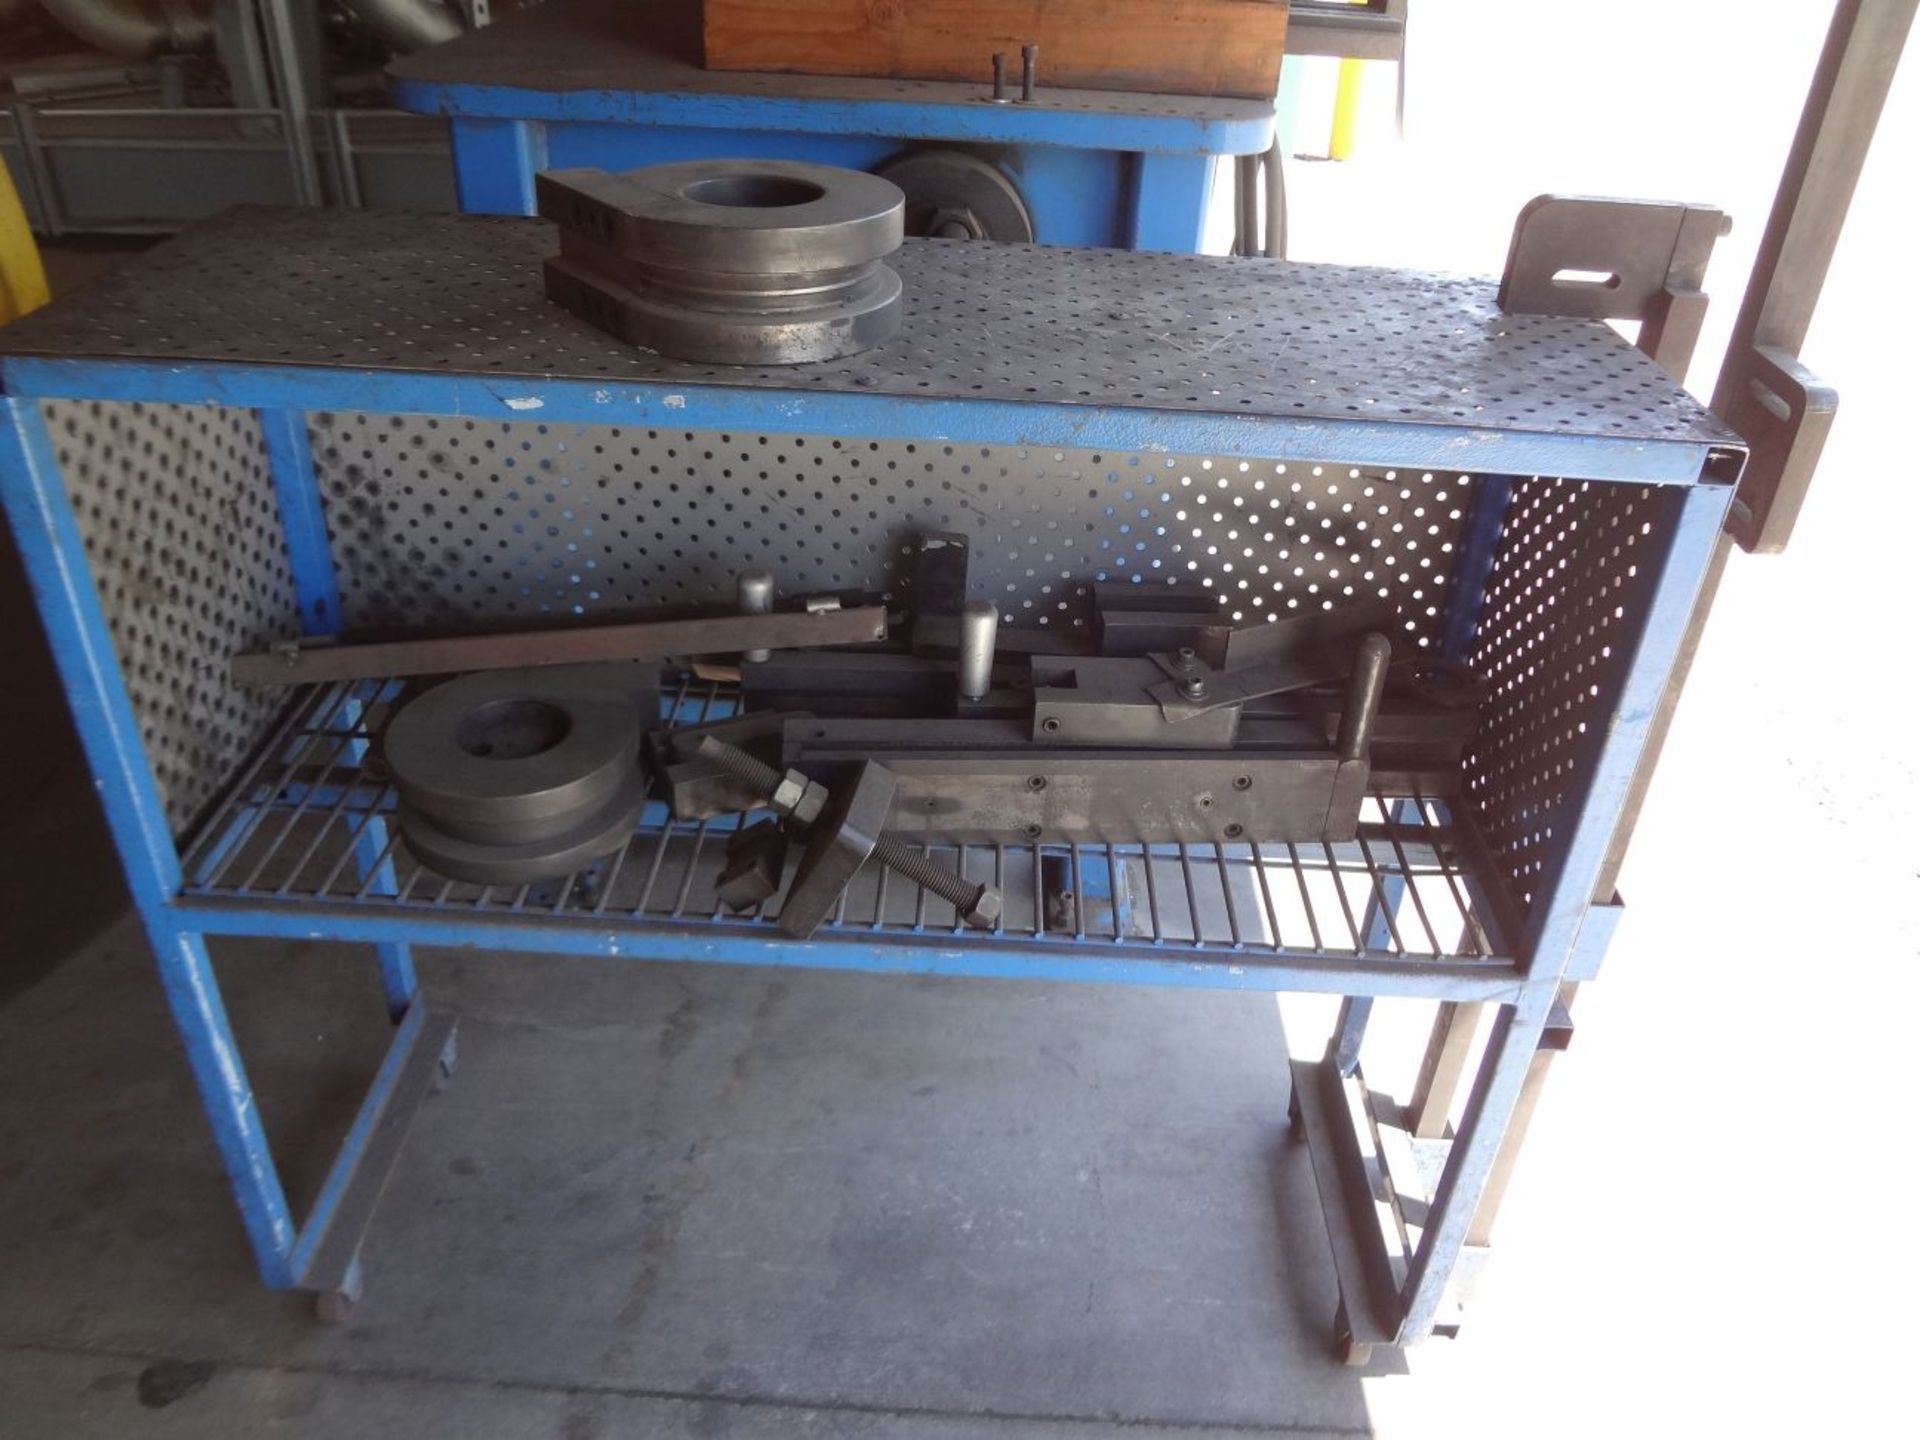 NIKO MODEL TBH1 HORIZONTAL TABLE TYPE BENDER WITH DIES - LOCATED AT 430 N. 47TH AVE., PHOENIX, AZ - Image 3 of 5